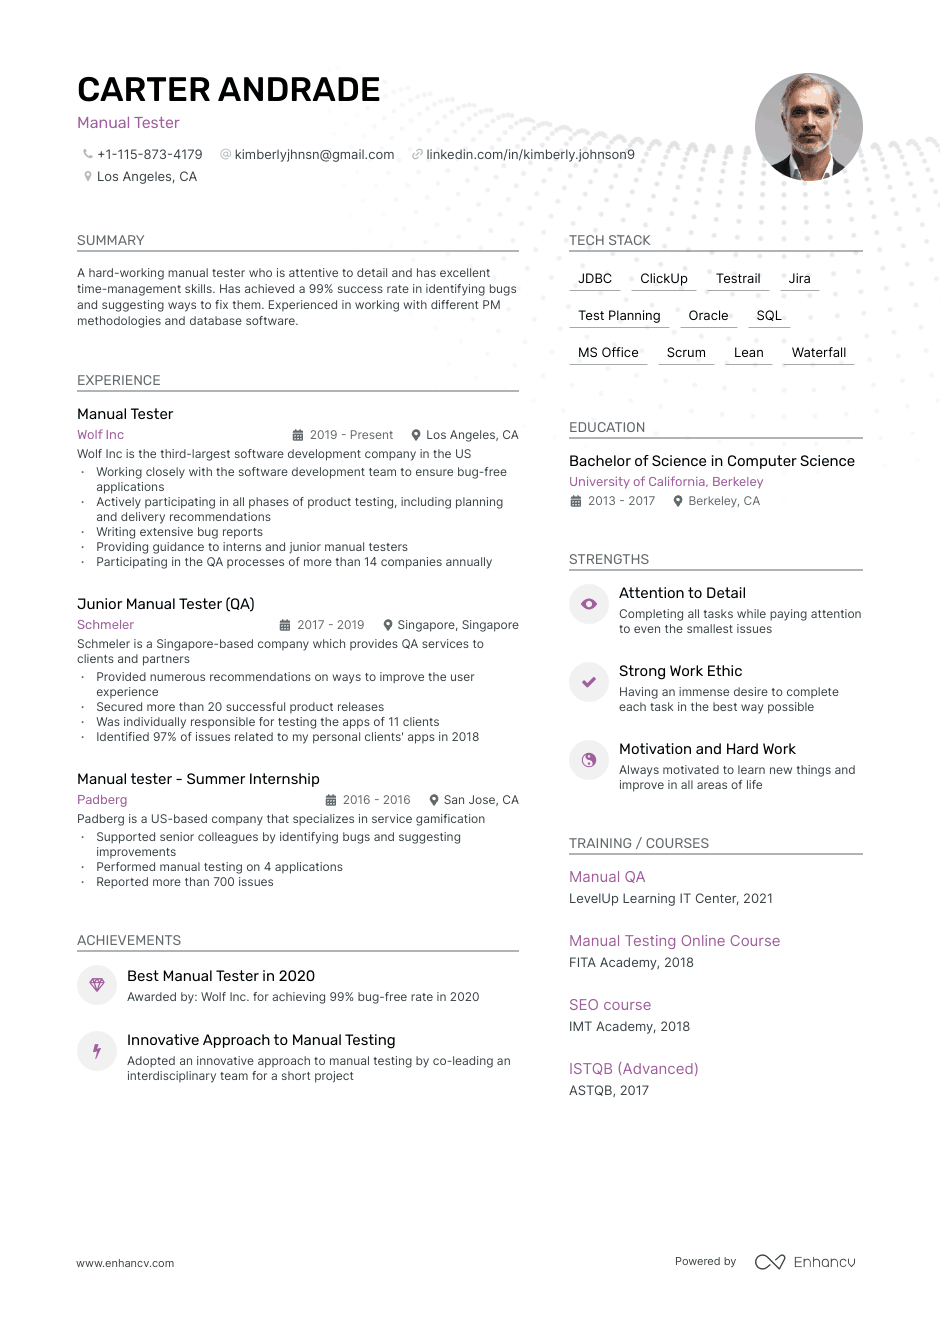 Manual tester resume example